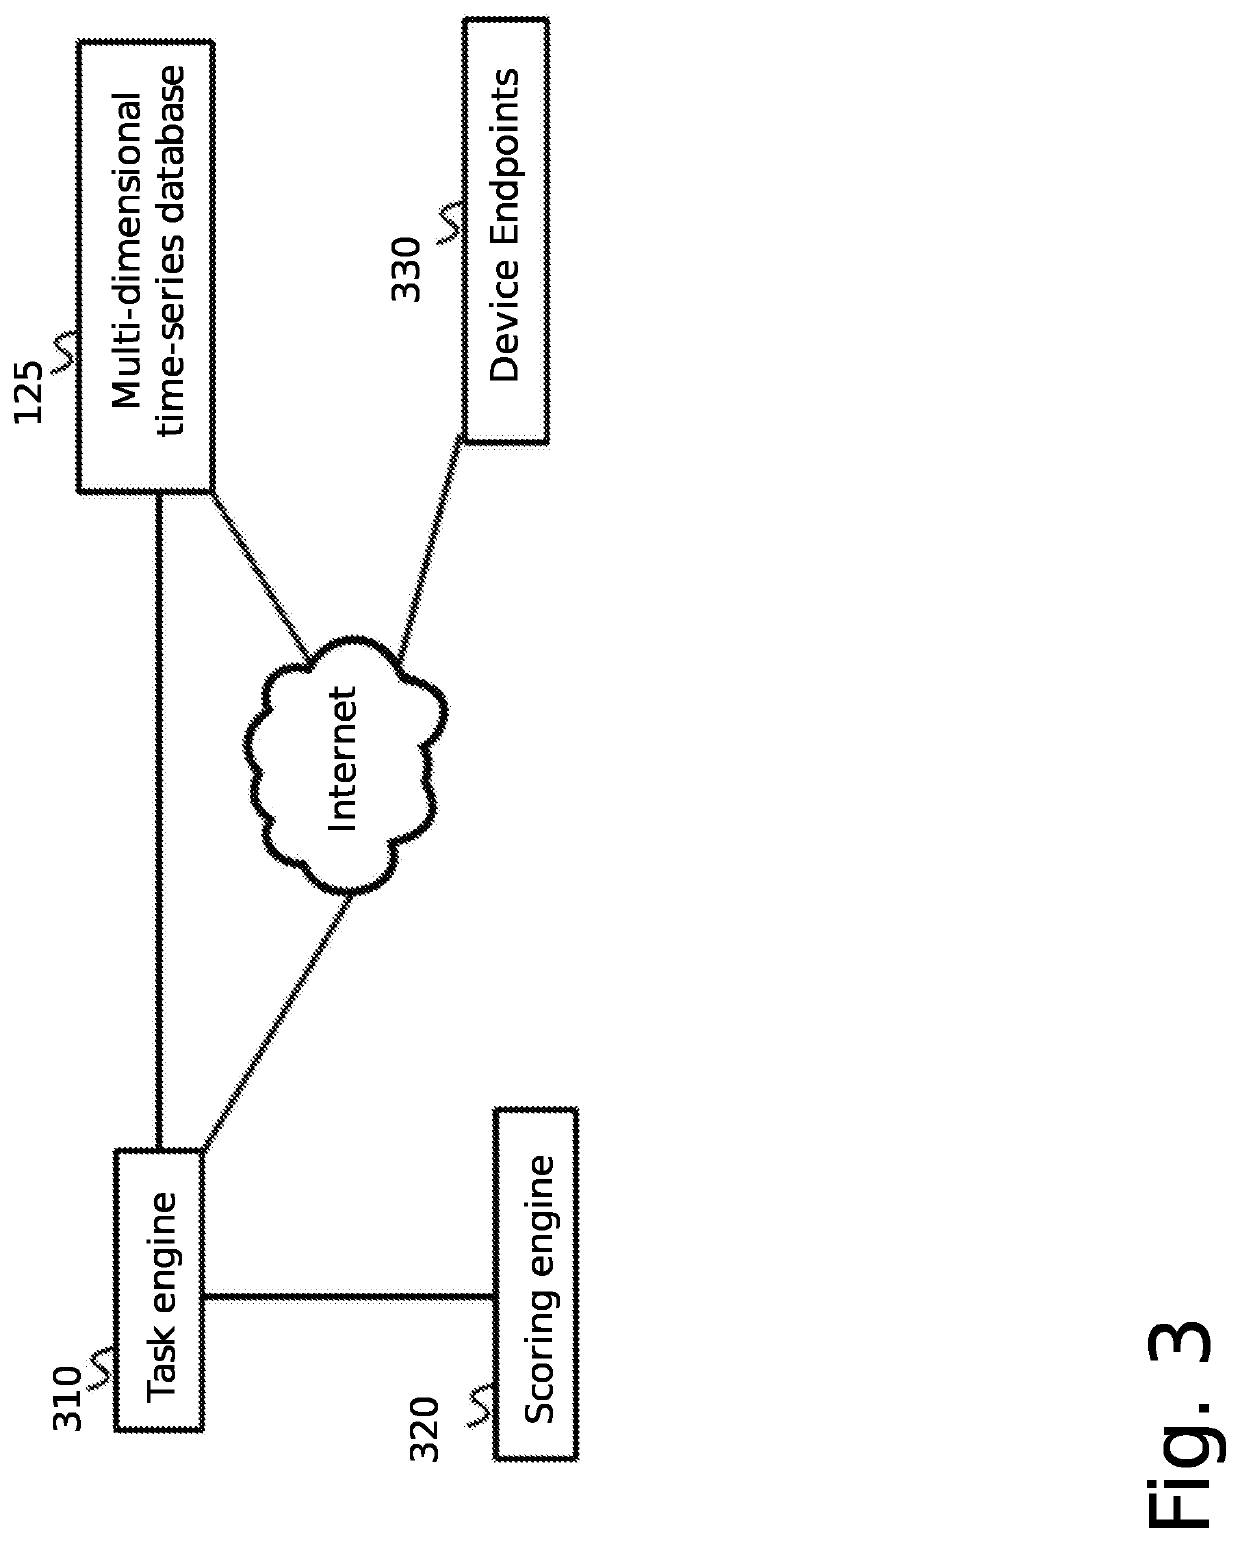 System and method for cybersecurity reconnaissance, analysis, and score generation using distributed systems